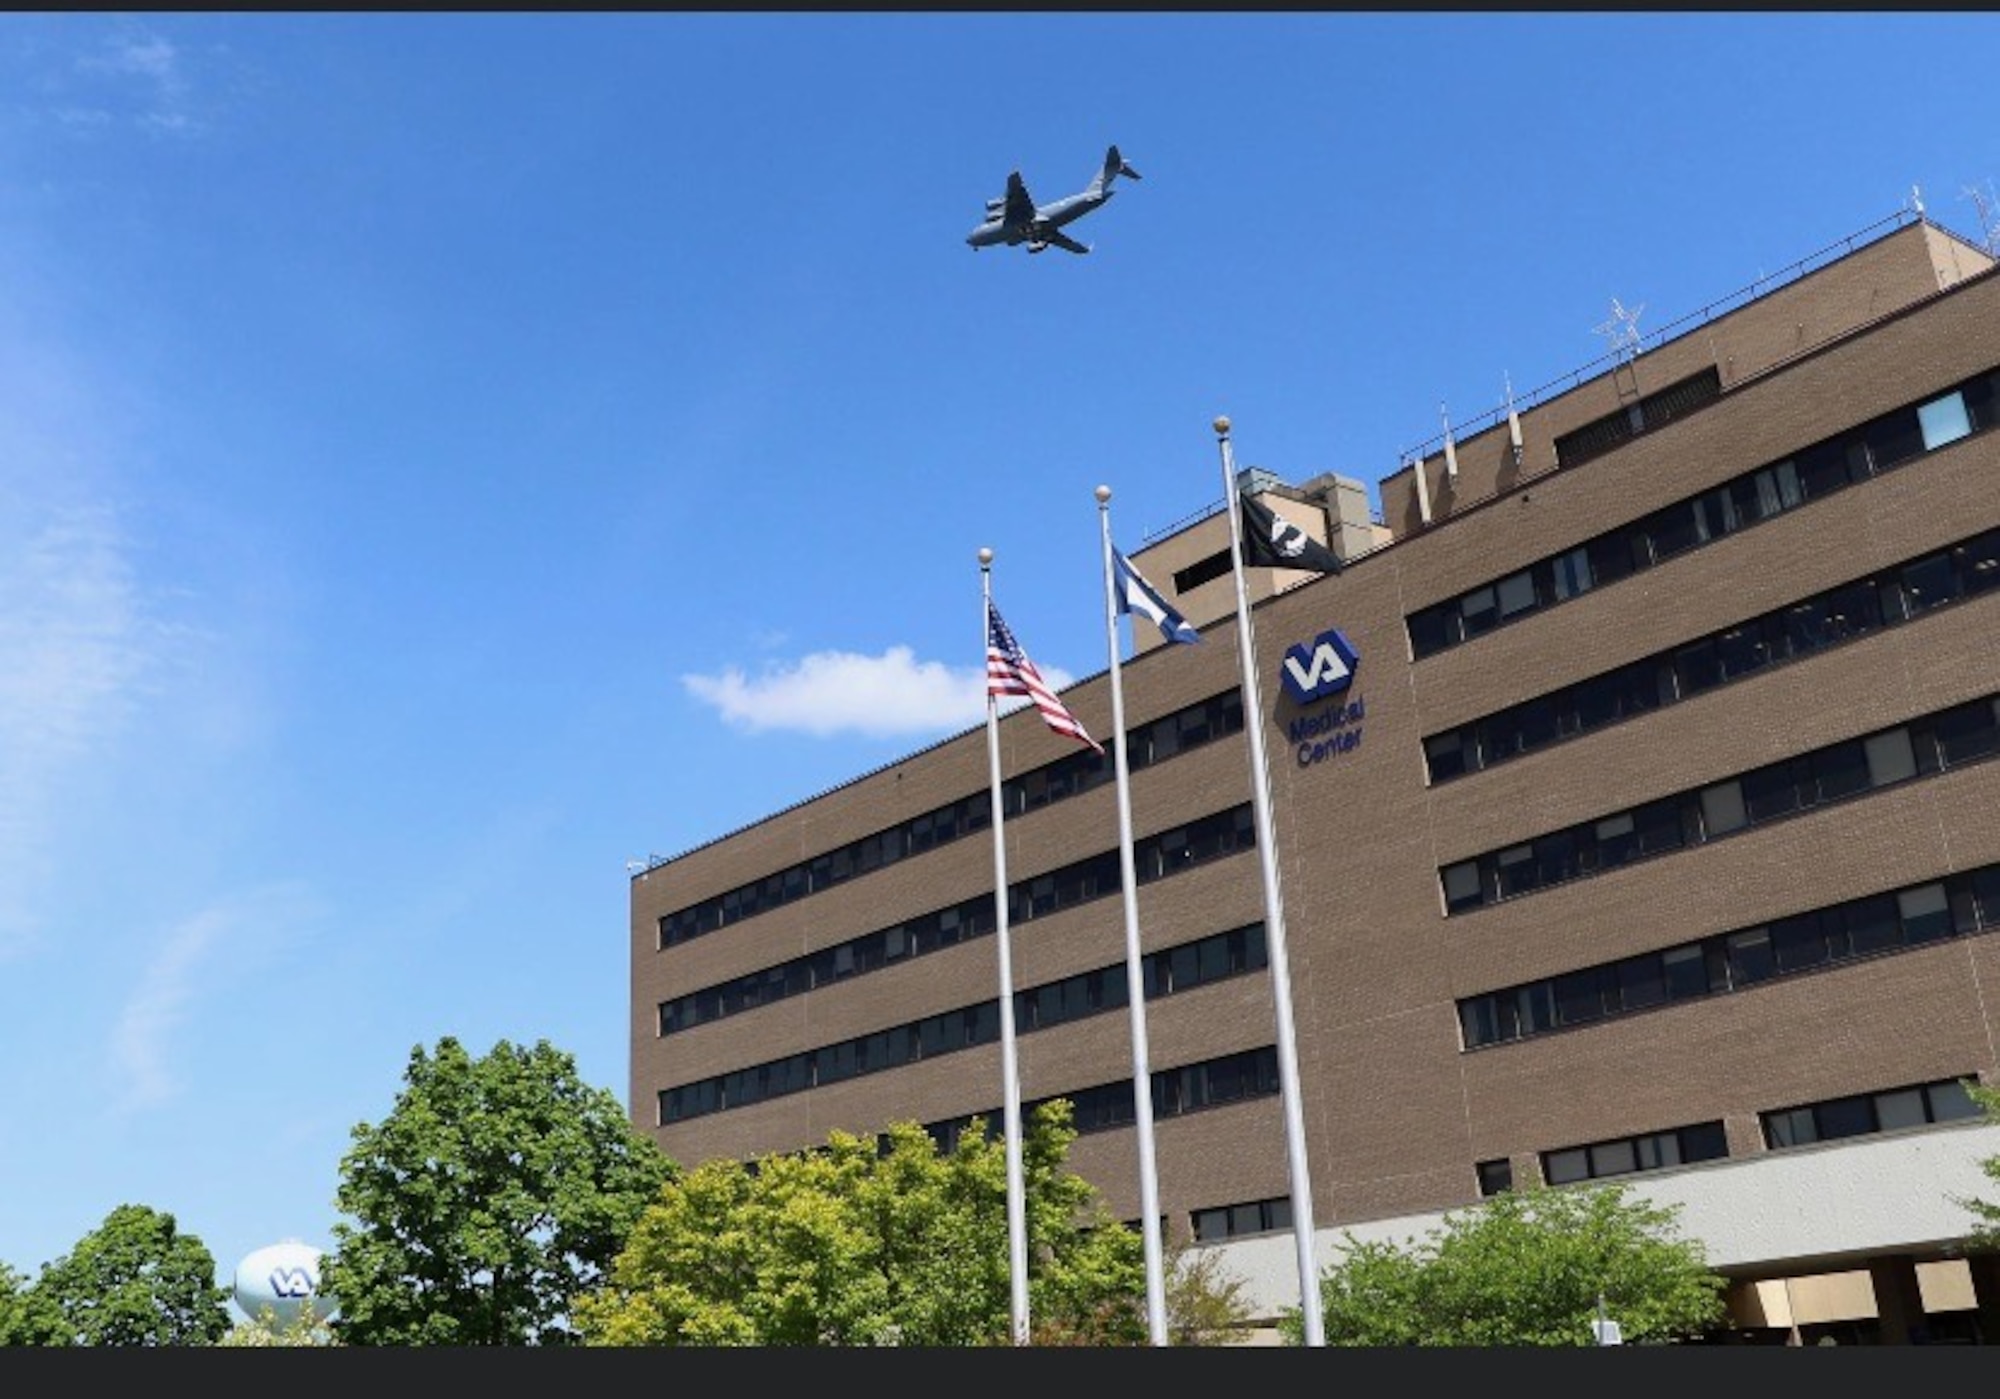 A C-17 Globemaster III from the 167th Airlift Wing, West Virginia Air
National Guard, flies over Winchester Medical Center, Winchester
Virginia, May 13, 2020, as part of America's tribute to front line
workers during COVID-19. The photo was shared by Tiffany English, a
physician's assistant at the medical center and sister of C-17 pilot
Brig. Gen. Melissa Coburn, 452nd Air Mobility Wing commander, March
Air Reserve Base, California. (Courtesy photo)